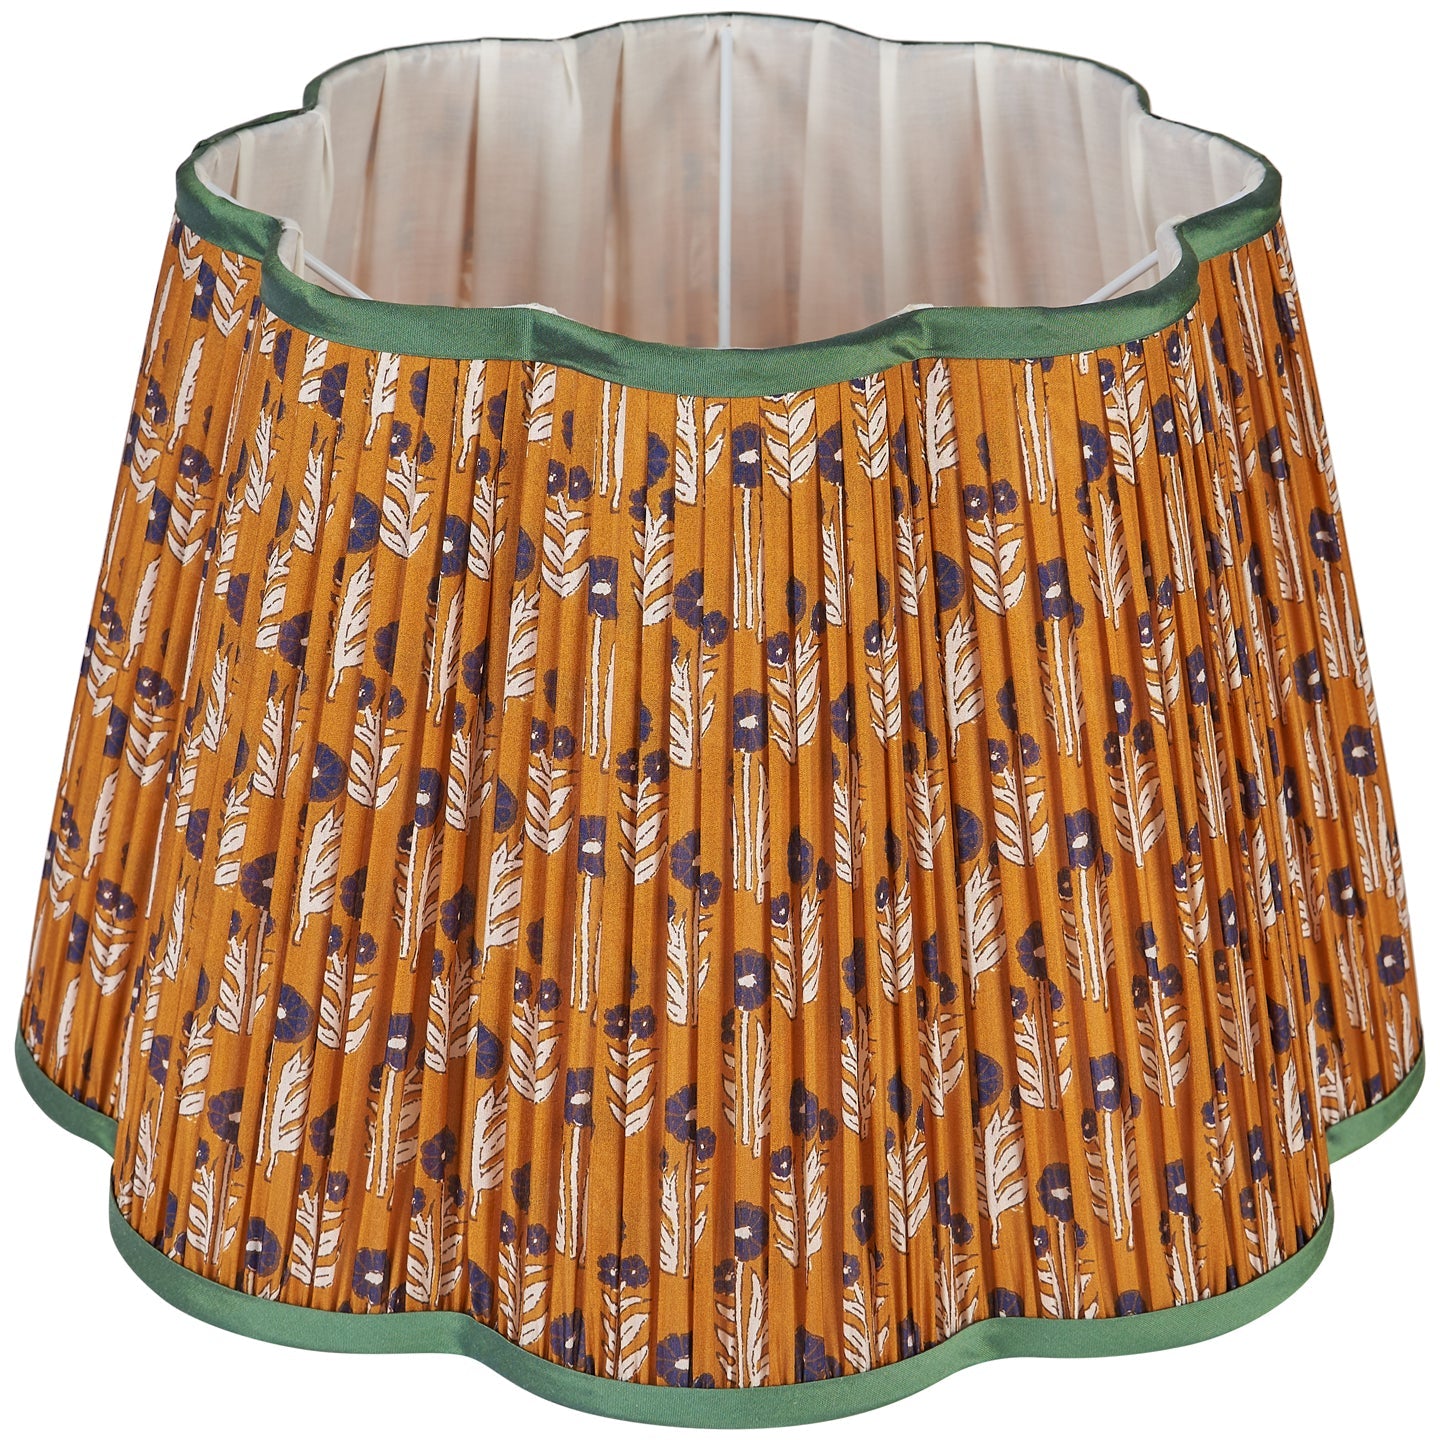 Blue on Cinnamon Marigold Pleated Silk Scalloped Lampshade with Green Trim